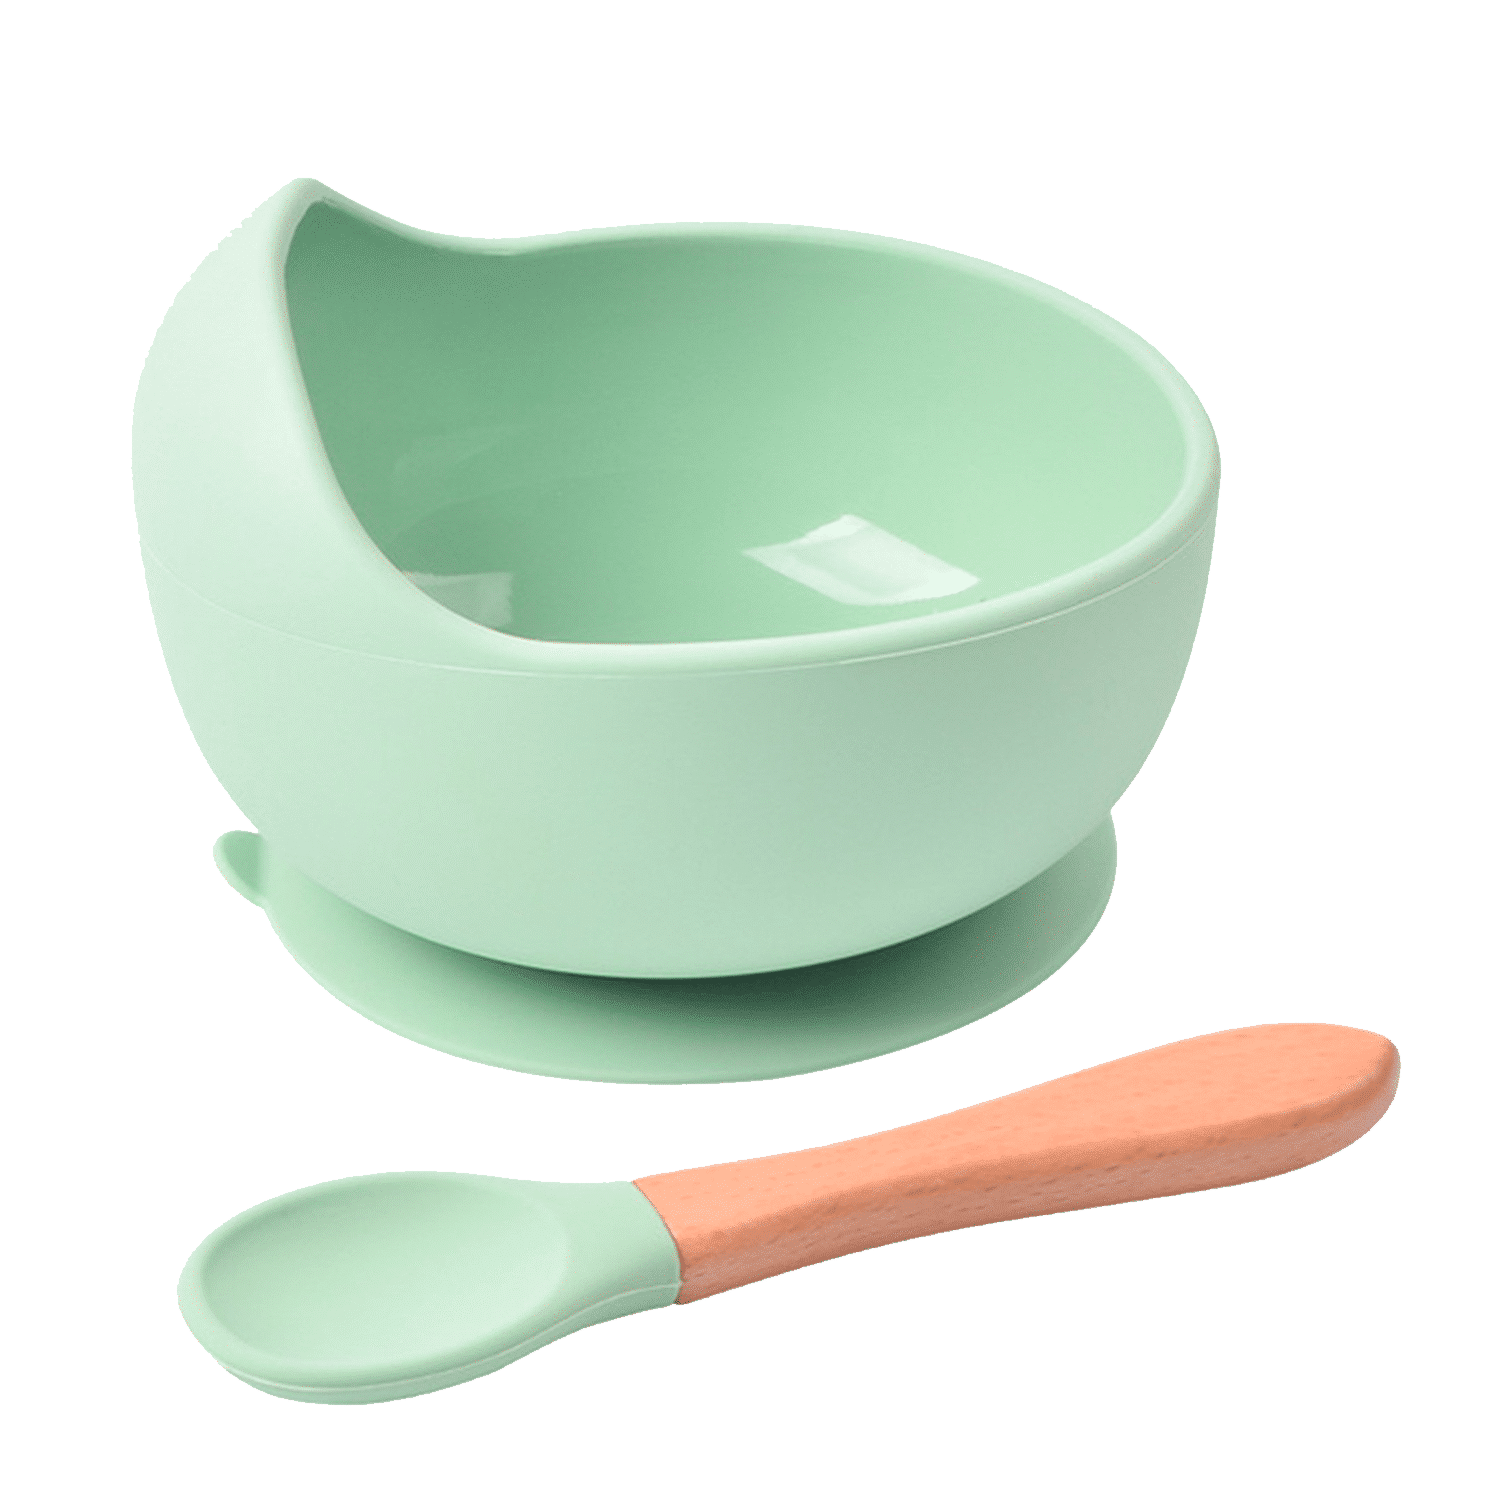 Kiddopark Baby Bowls Toddler Bowls Silicone Suction Bowls for Baby with Spoon